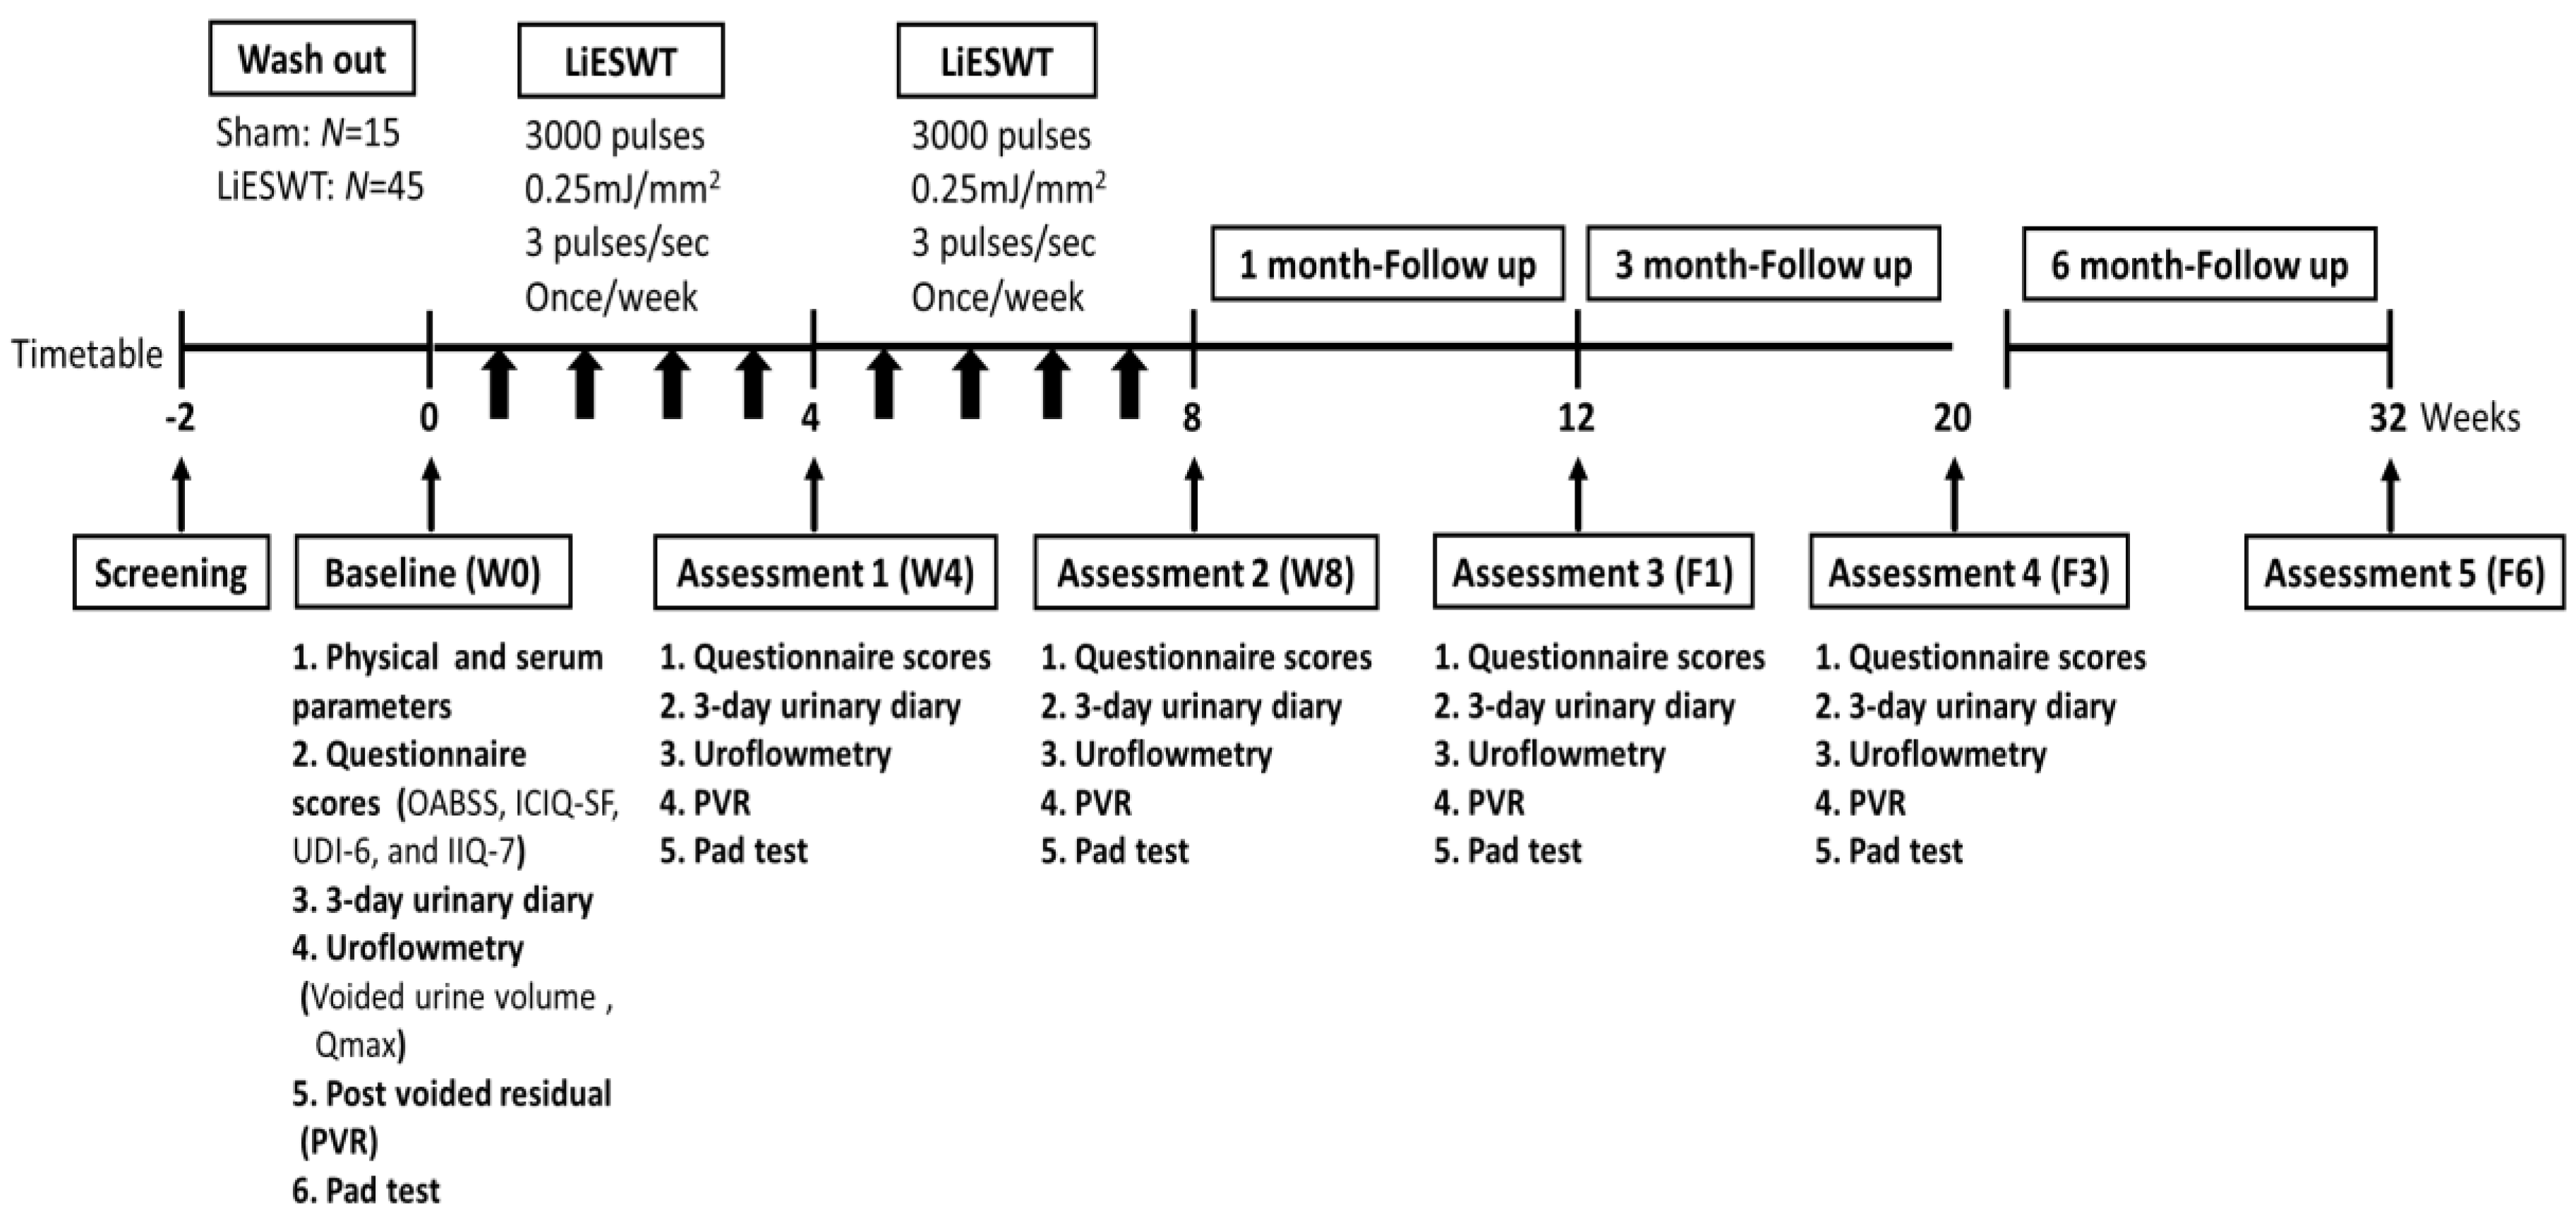 Medicina | Free Full-Text | Low Intensity Extracorporeal Shock Wave Therapy  as a Novel Treatment for Stress Urinary Incontinence: A  Randomized-Controlled Clinical Study | HTML